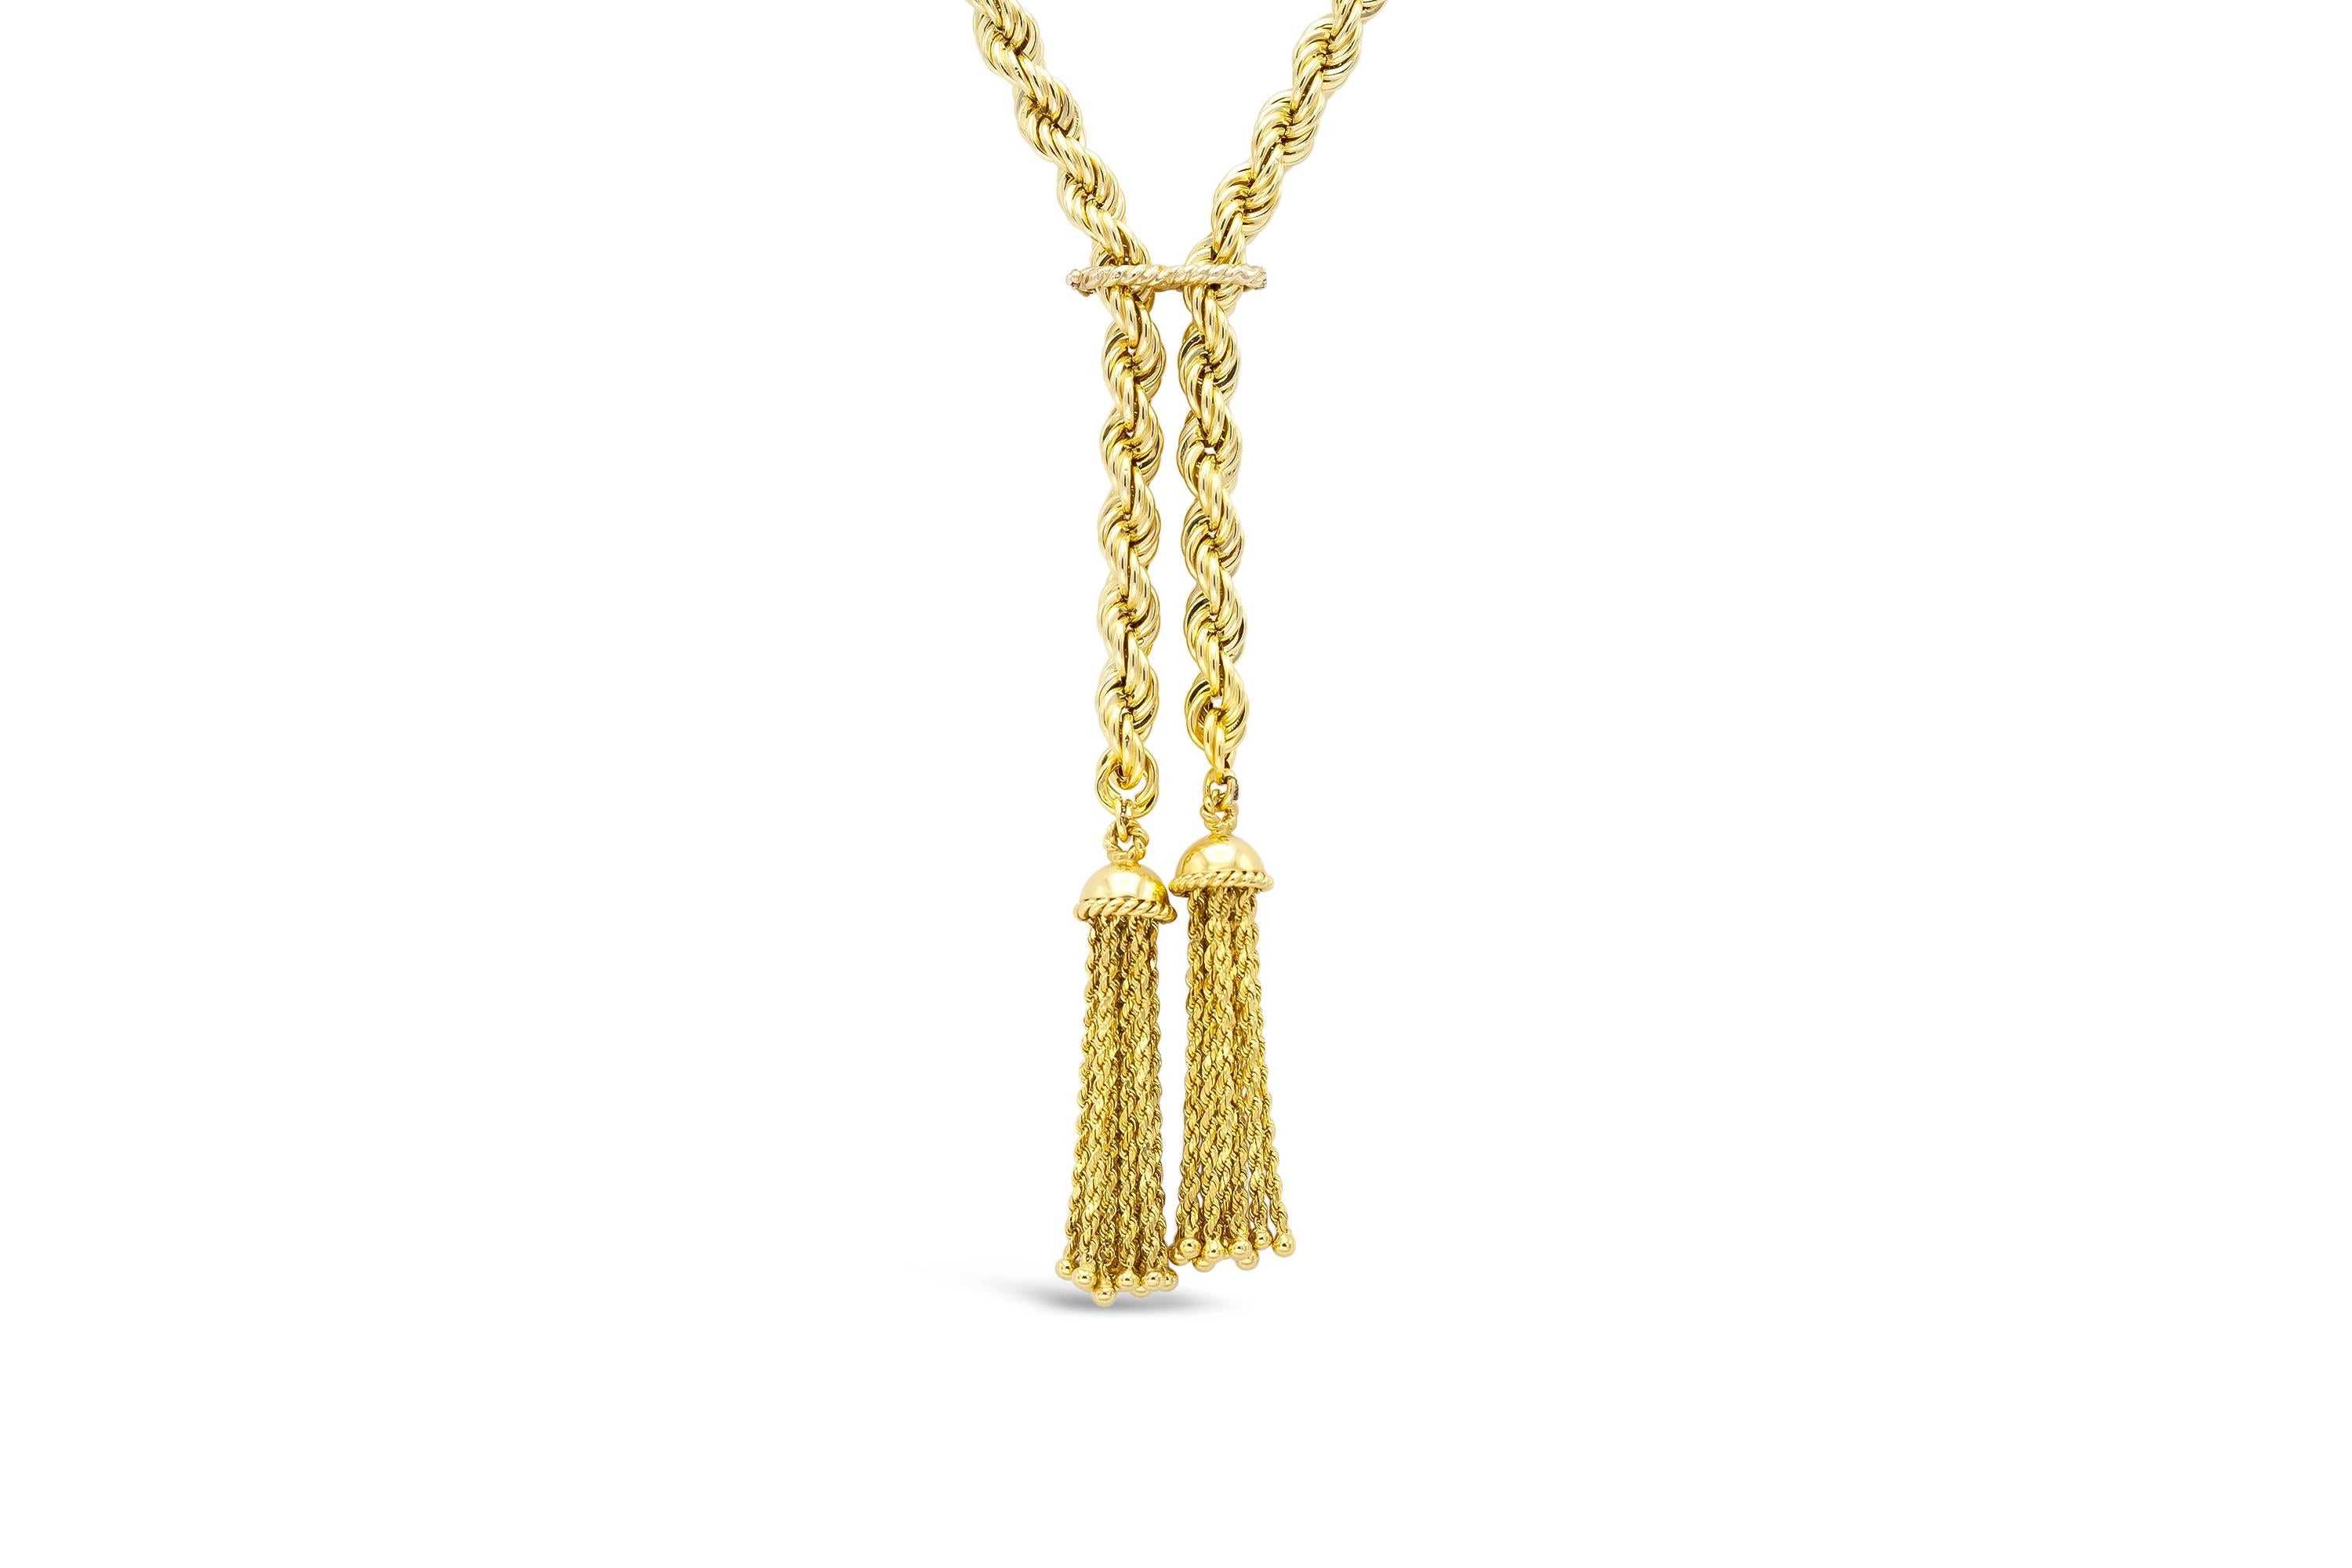 Finely crafted in 14k yellow gold.
Rope chain is 36 1/2